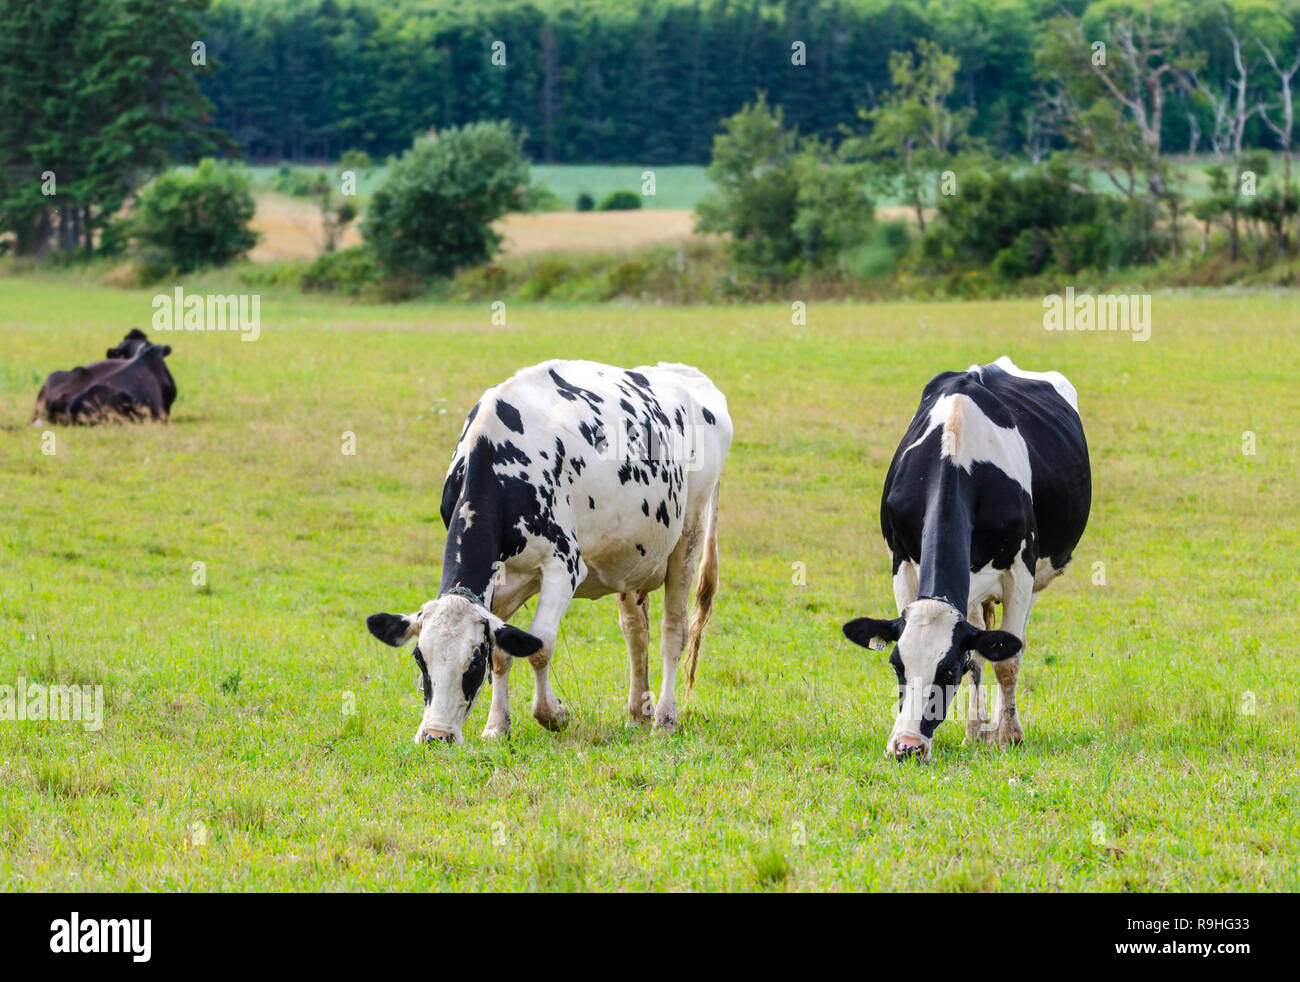 Pair of Holstein Friesians dairy cows grazing in a meadow.  These cows are known as the world's highest production dairy animals. Stock Photo